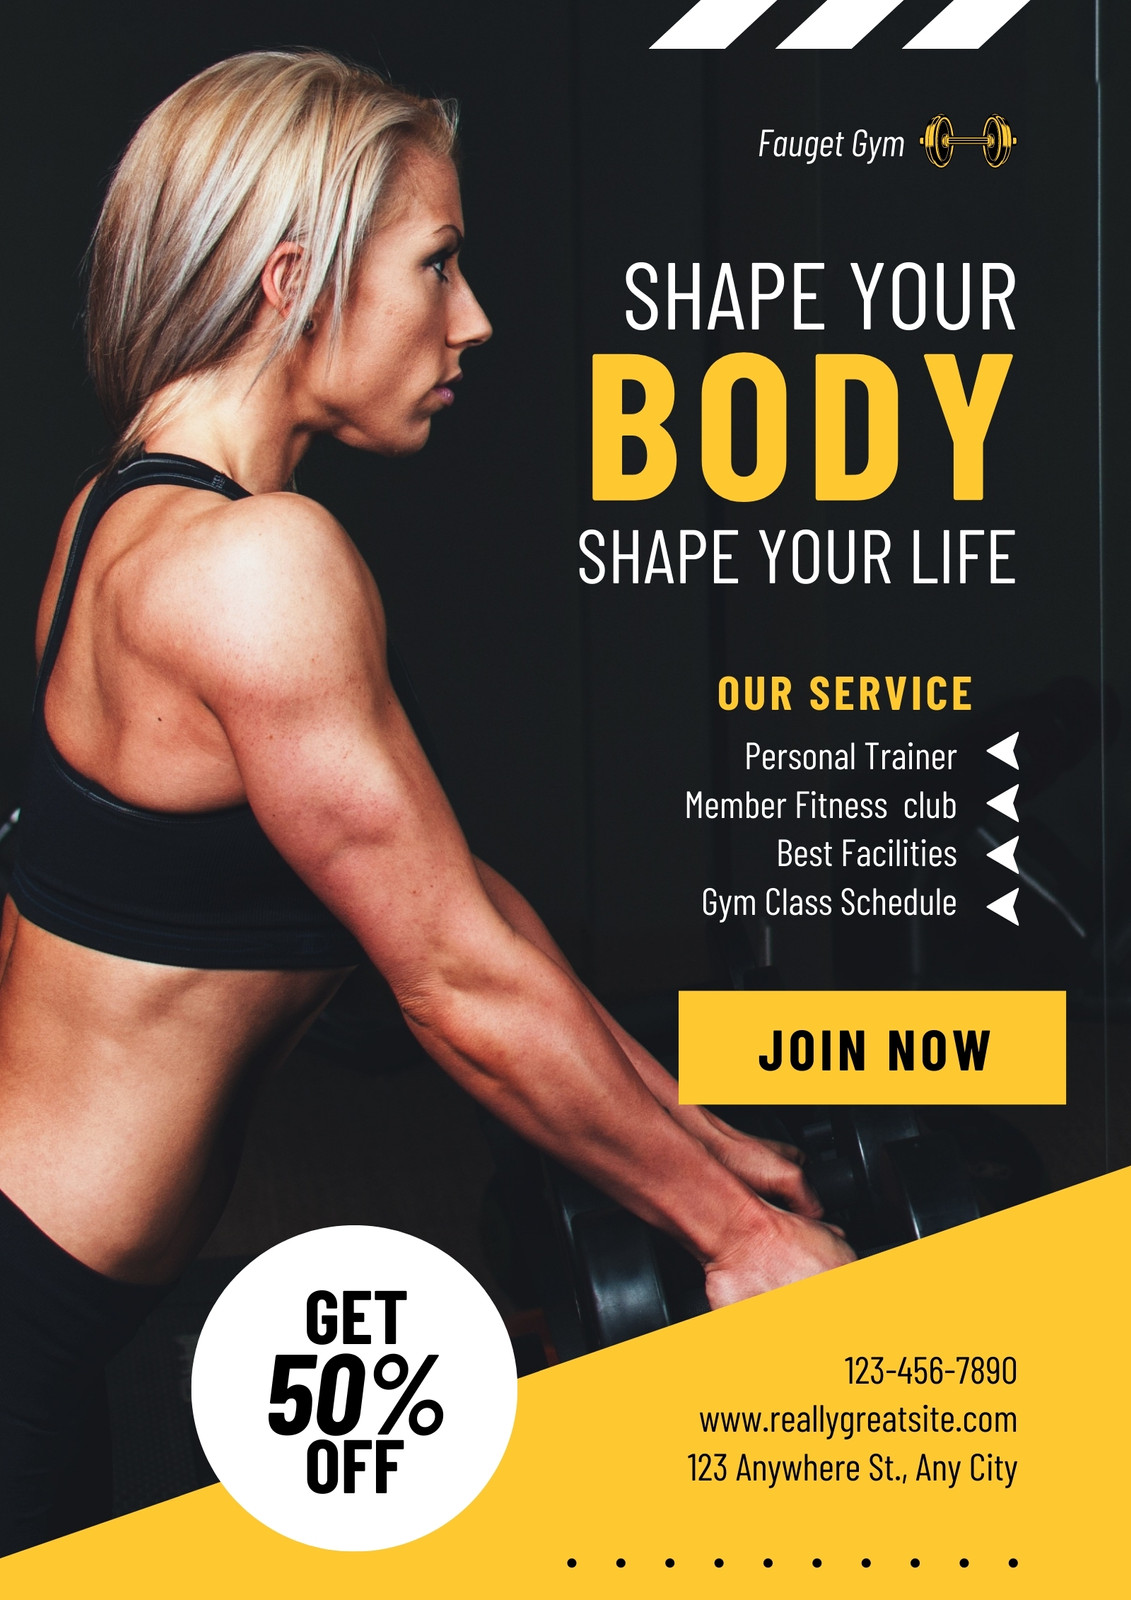 Best Fitness Flyer Templates (for Gyms, Trainers and More)